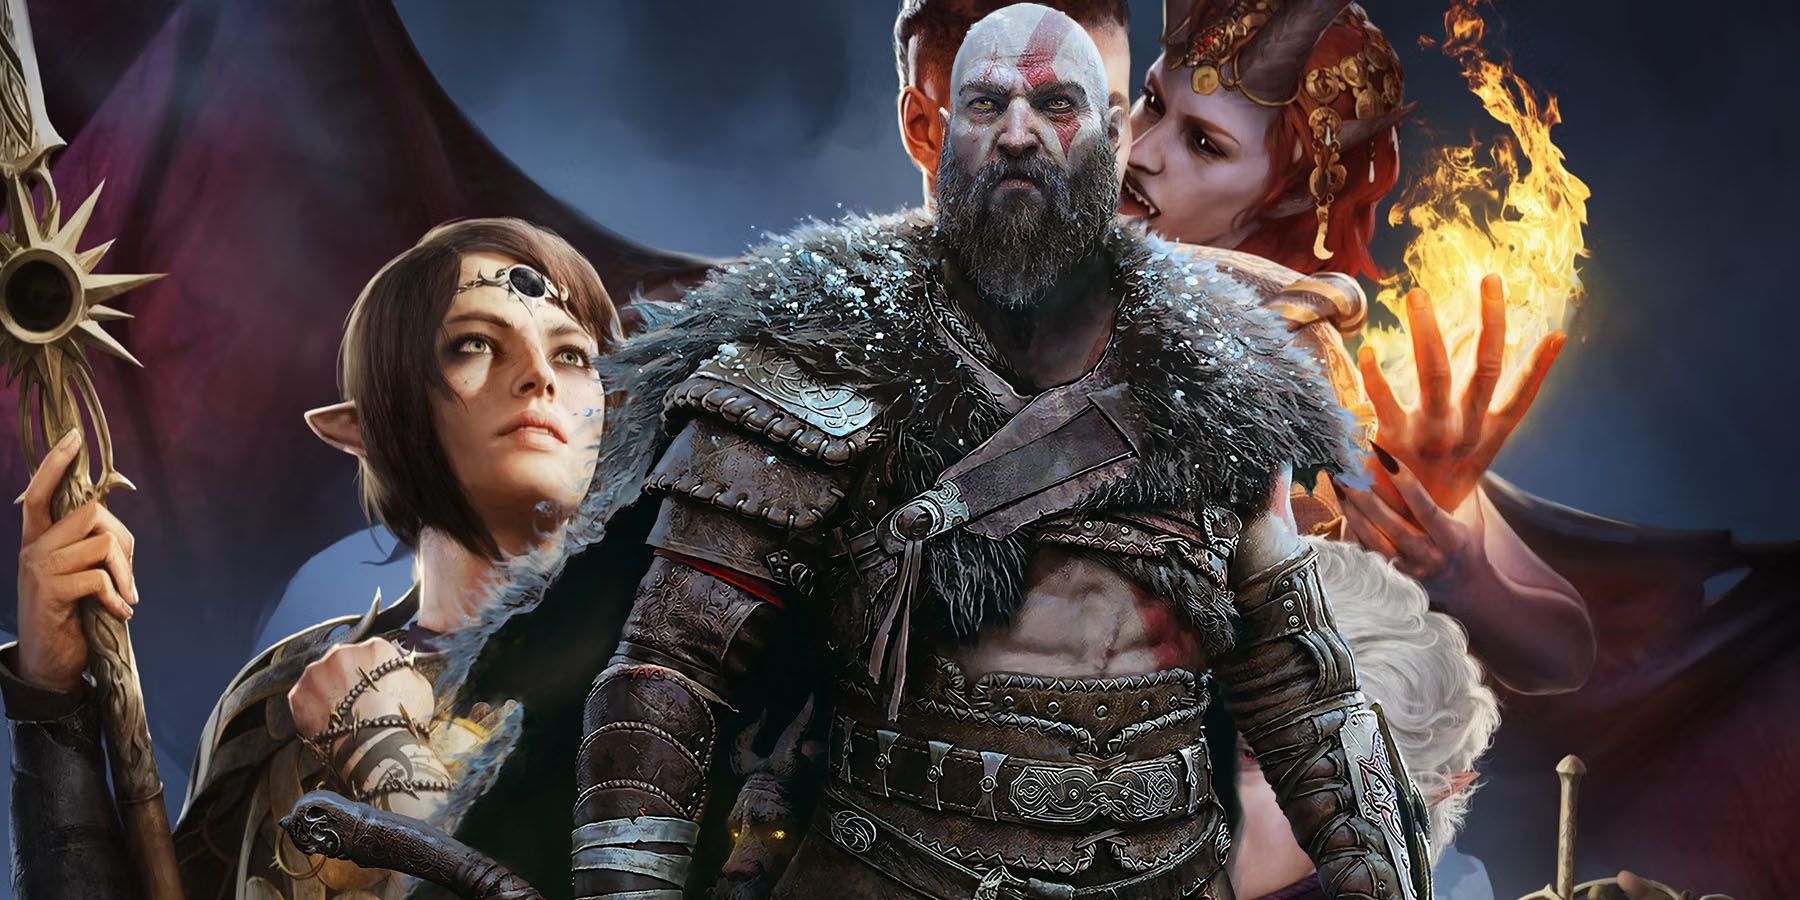 A promotional image of various characters from Baldur's Gate 3, with Kratos from God of War Ragnarok inserted into it.